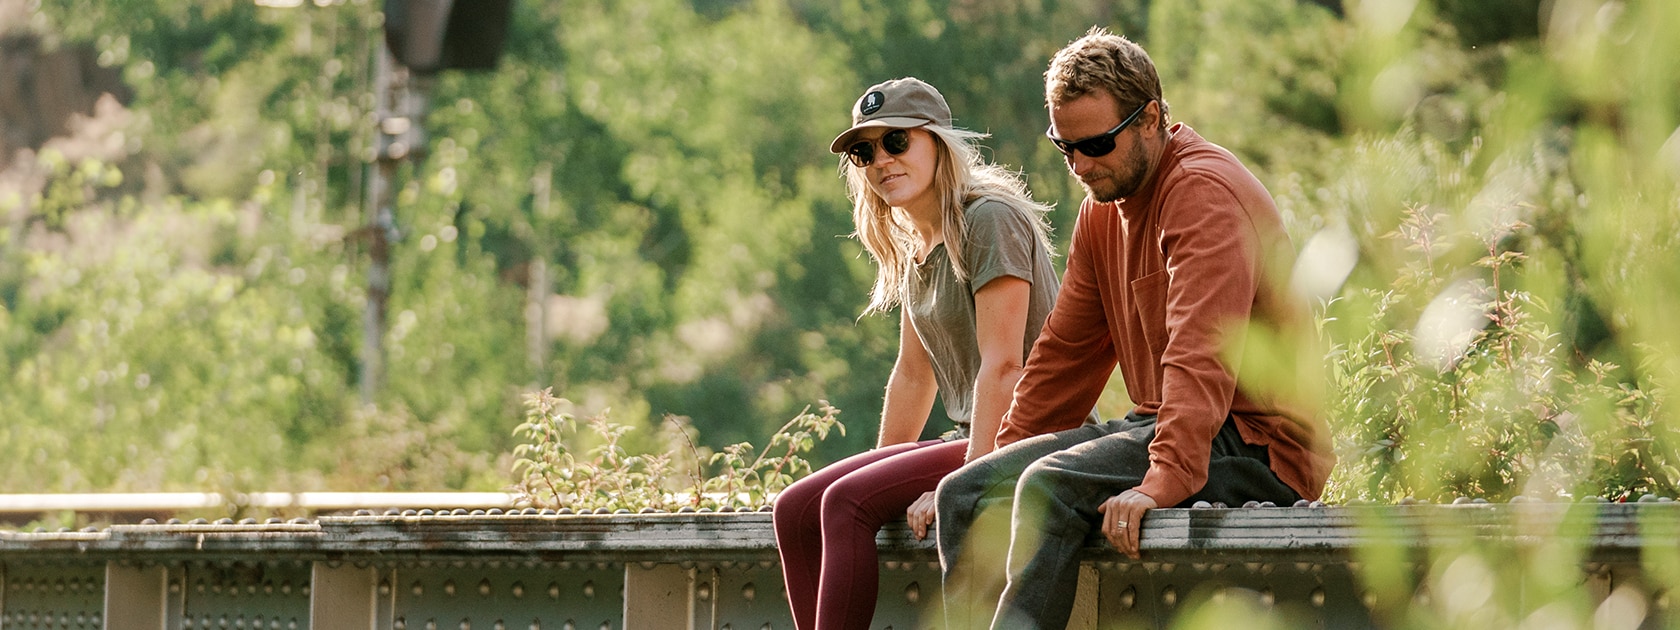 image of two people wearing zeal polarized sunglasses sitting on the edge of a bridge